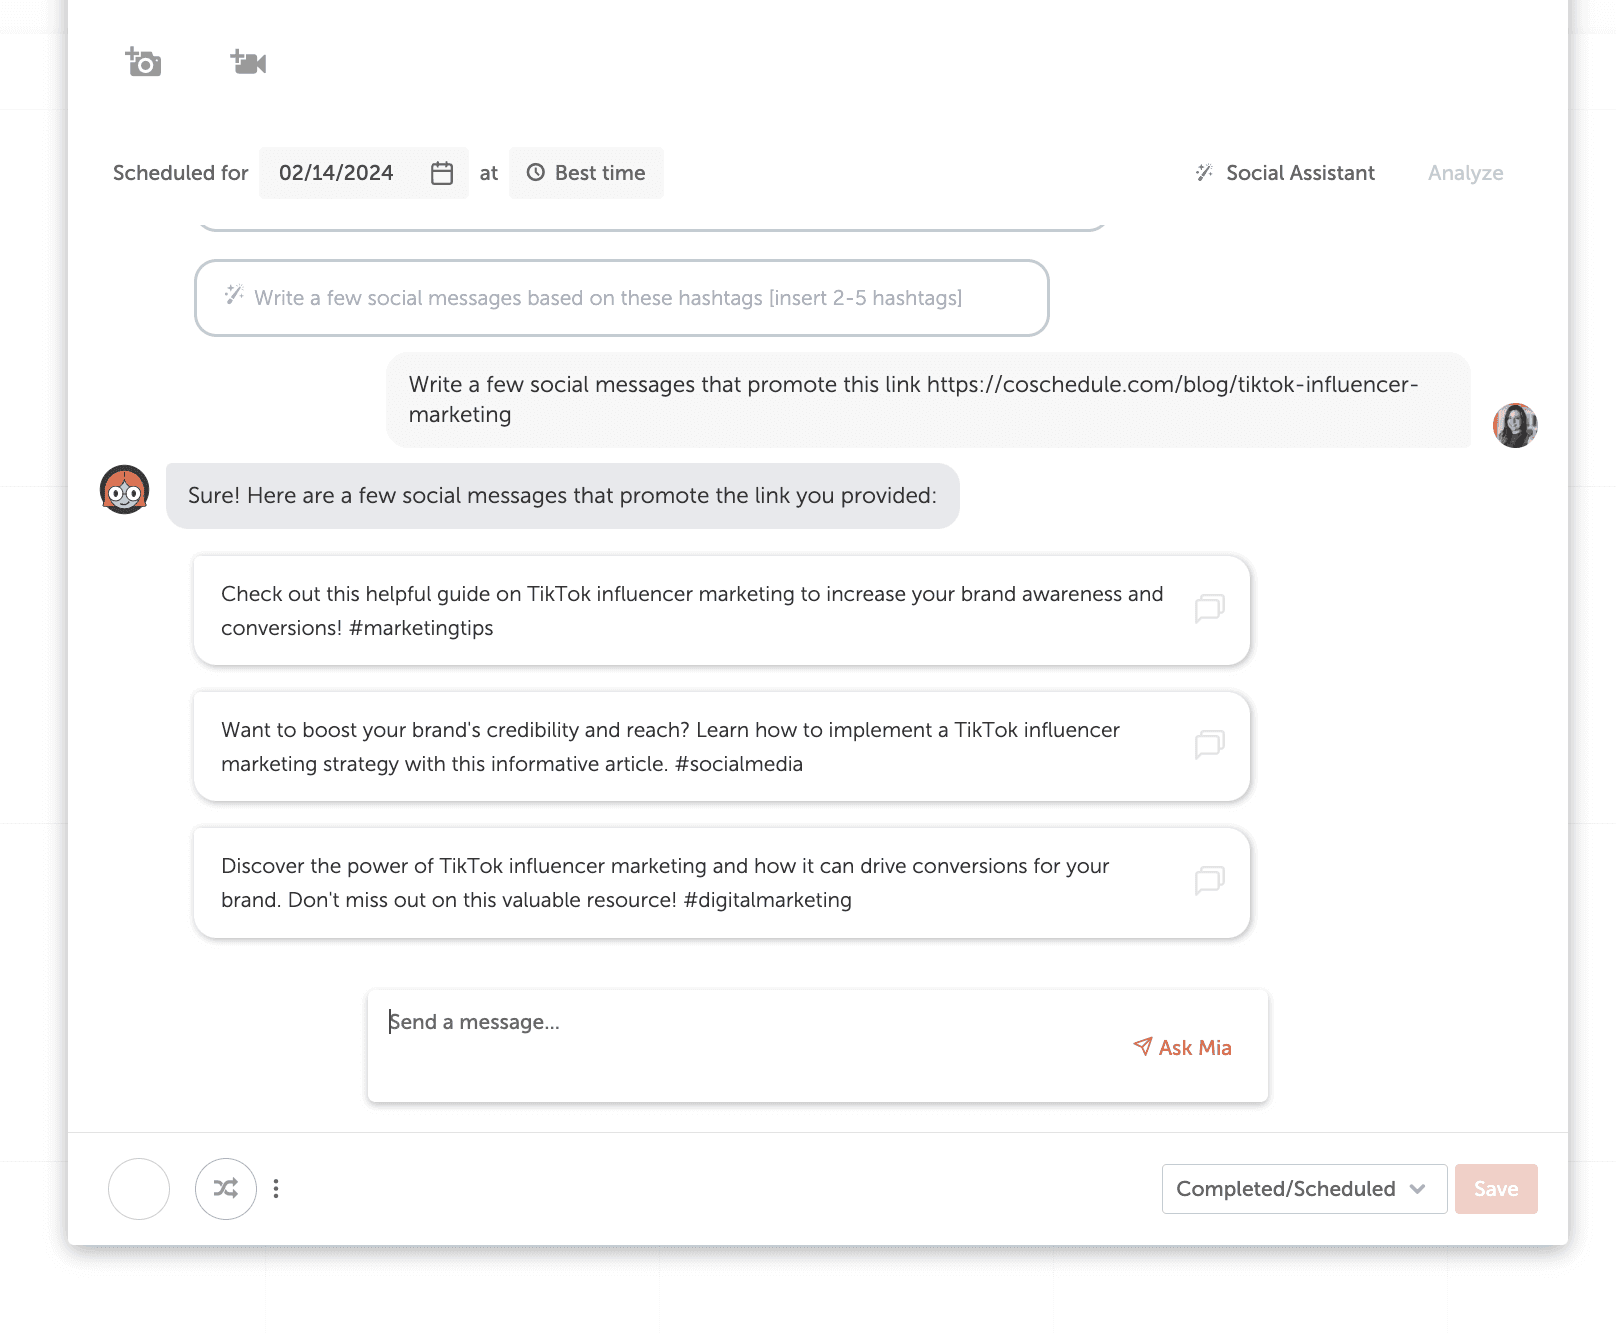 CoSchedule's Social Assistant replying to a prompt asking for social messages